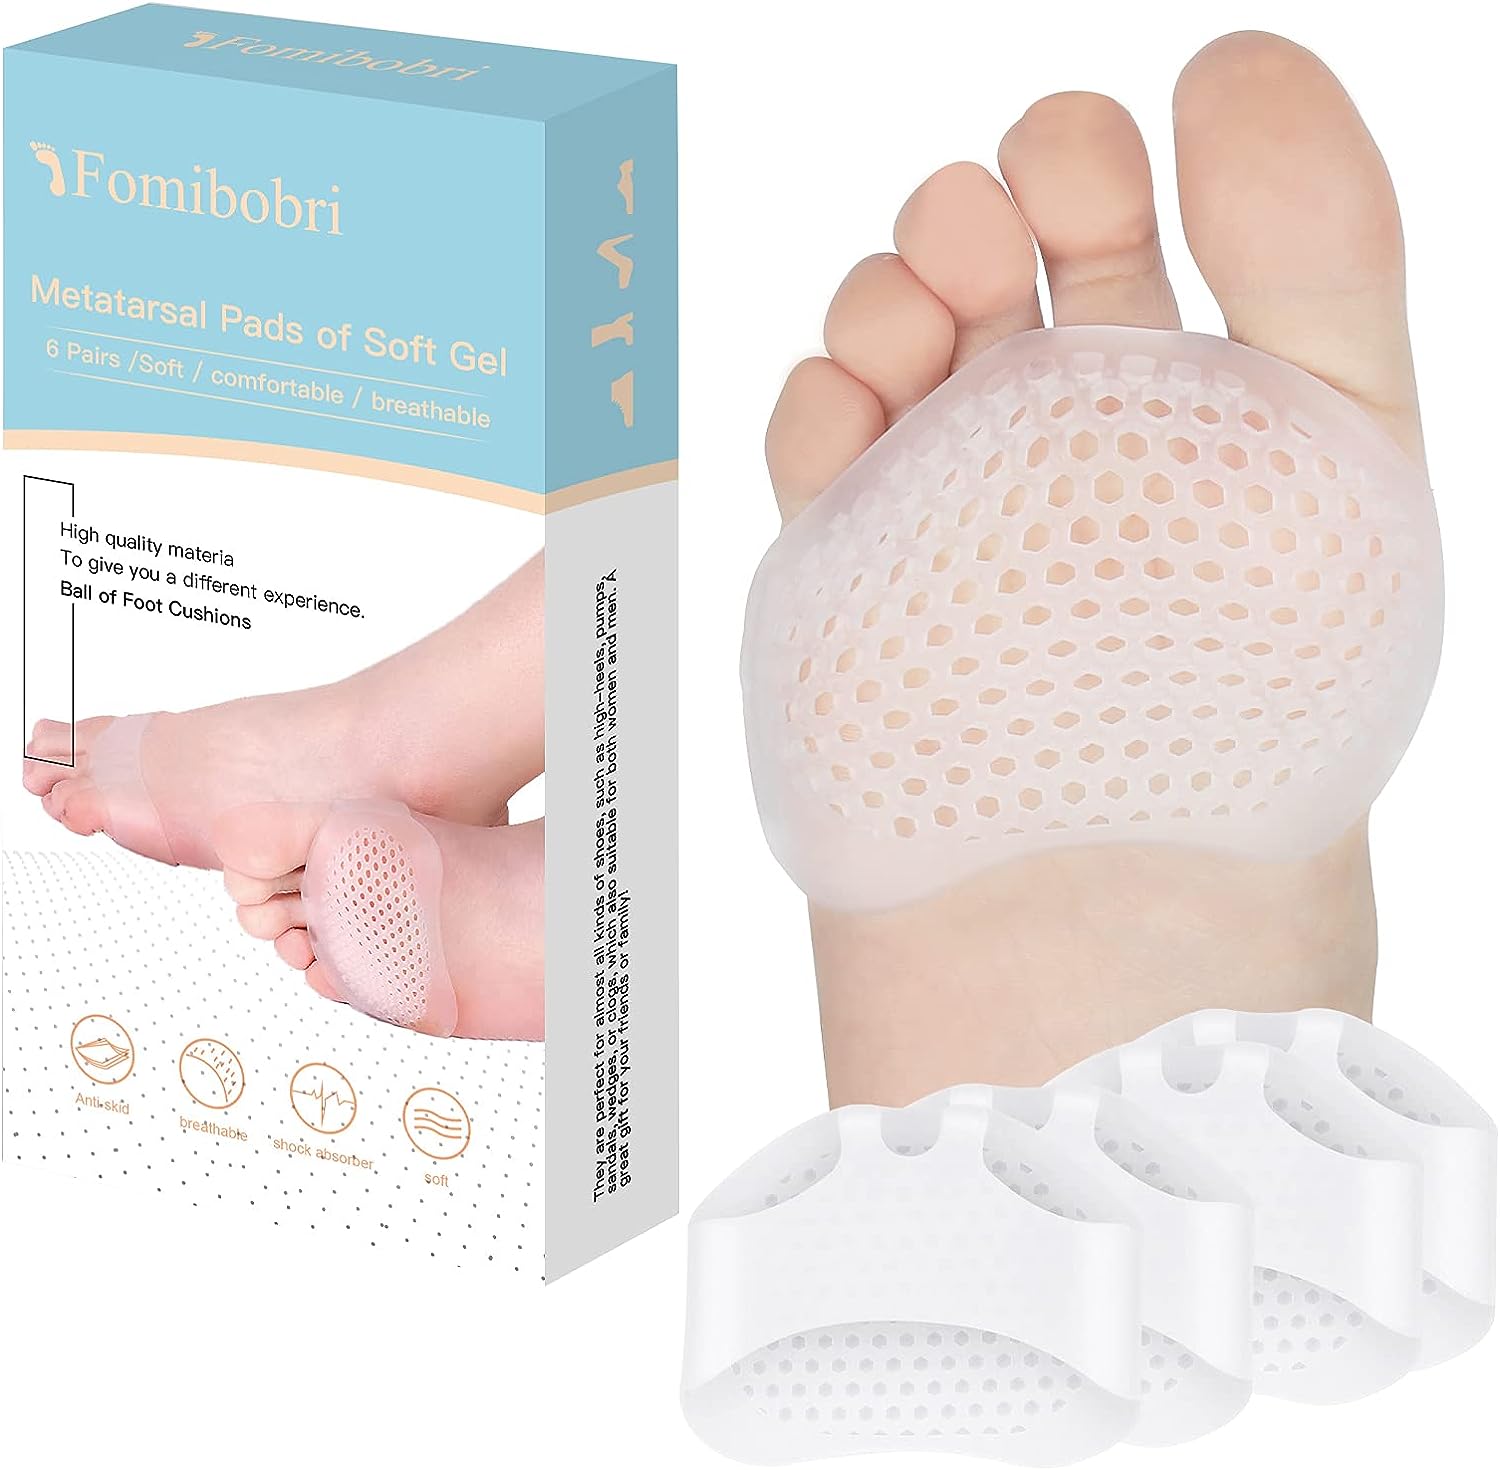 shoe inserts for fat pad atrophy detailed review